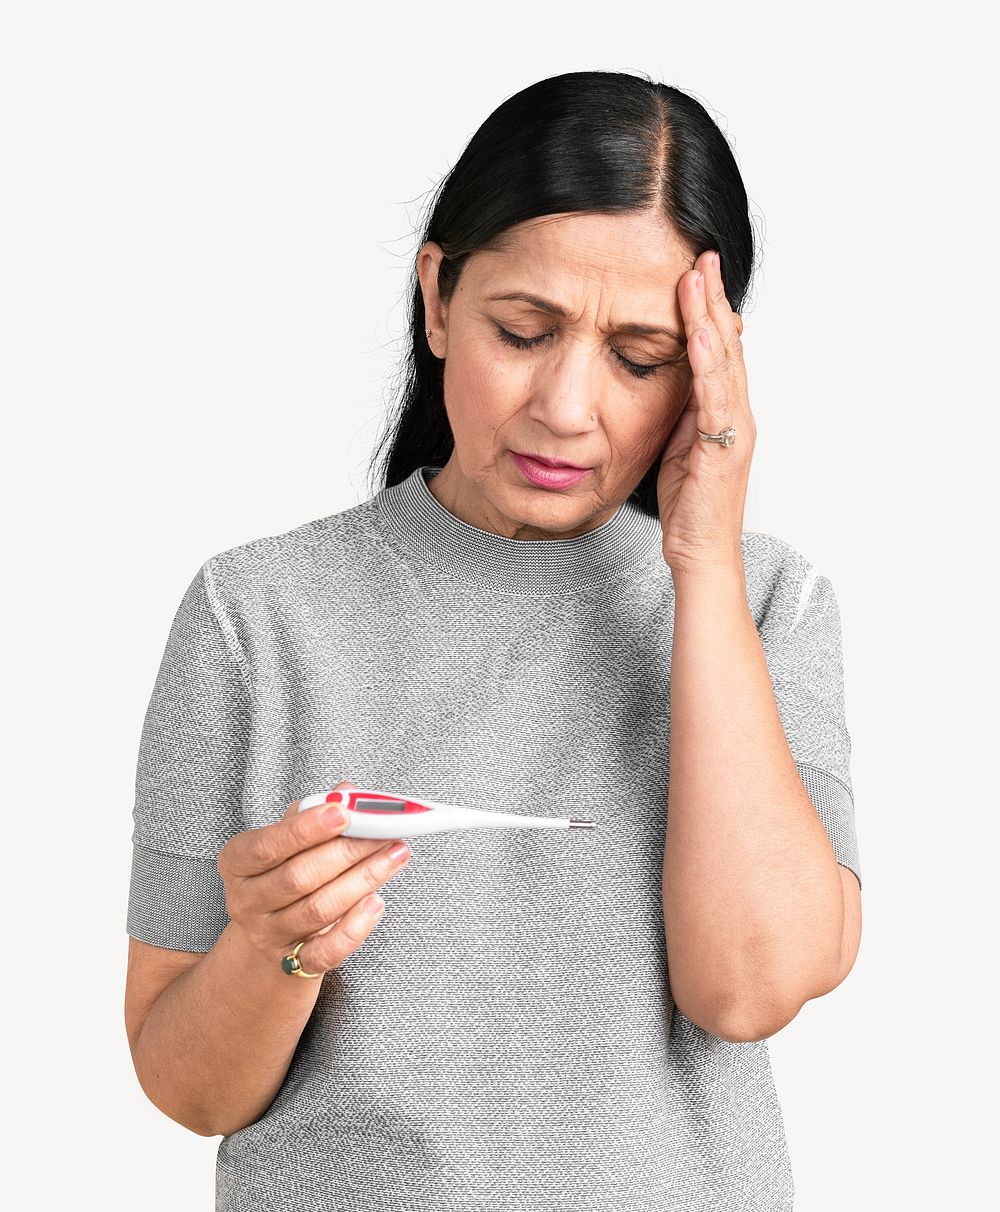 Indian woman headache measuring her temperature with electric thermometer image element